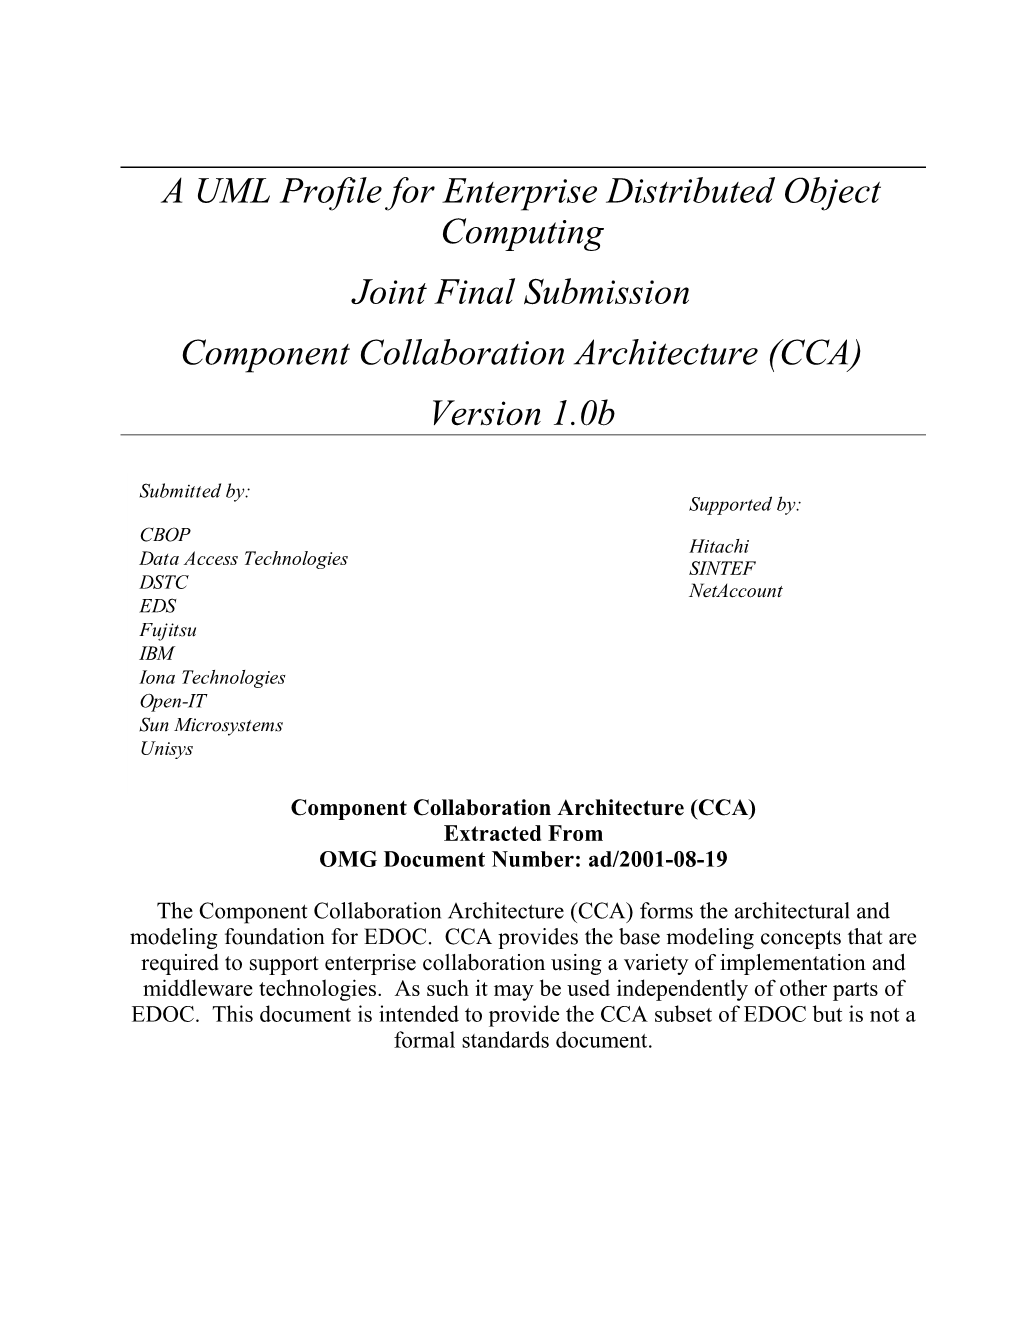 A UML Profile for Enterprise Distributed Object Computing